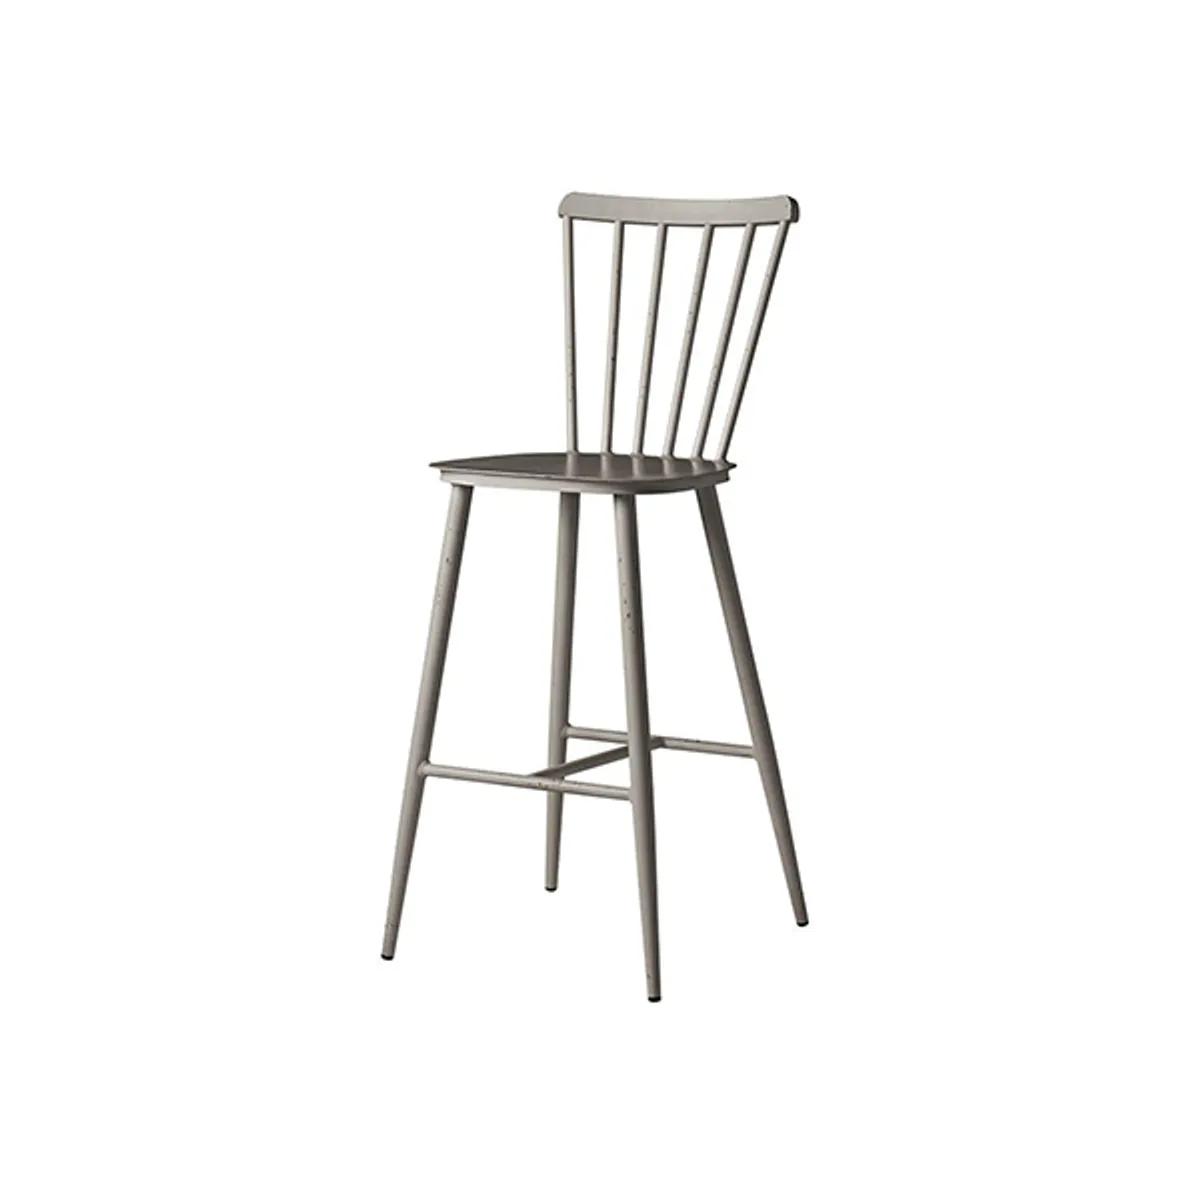 Spool Bar Stool Grey Inside Out Contracts